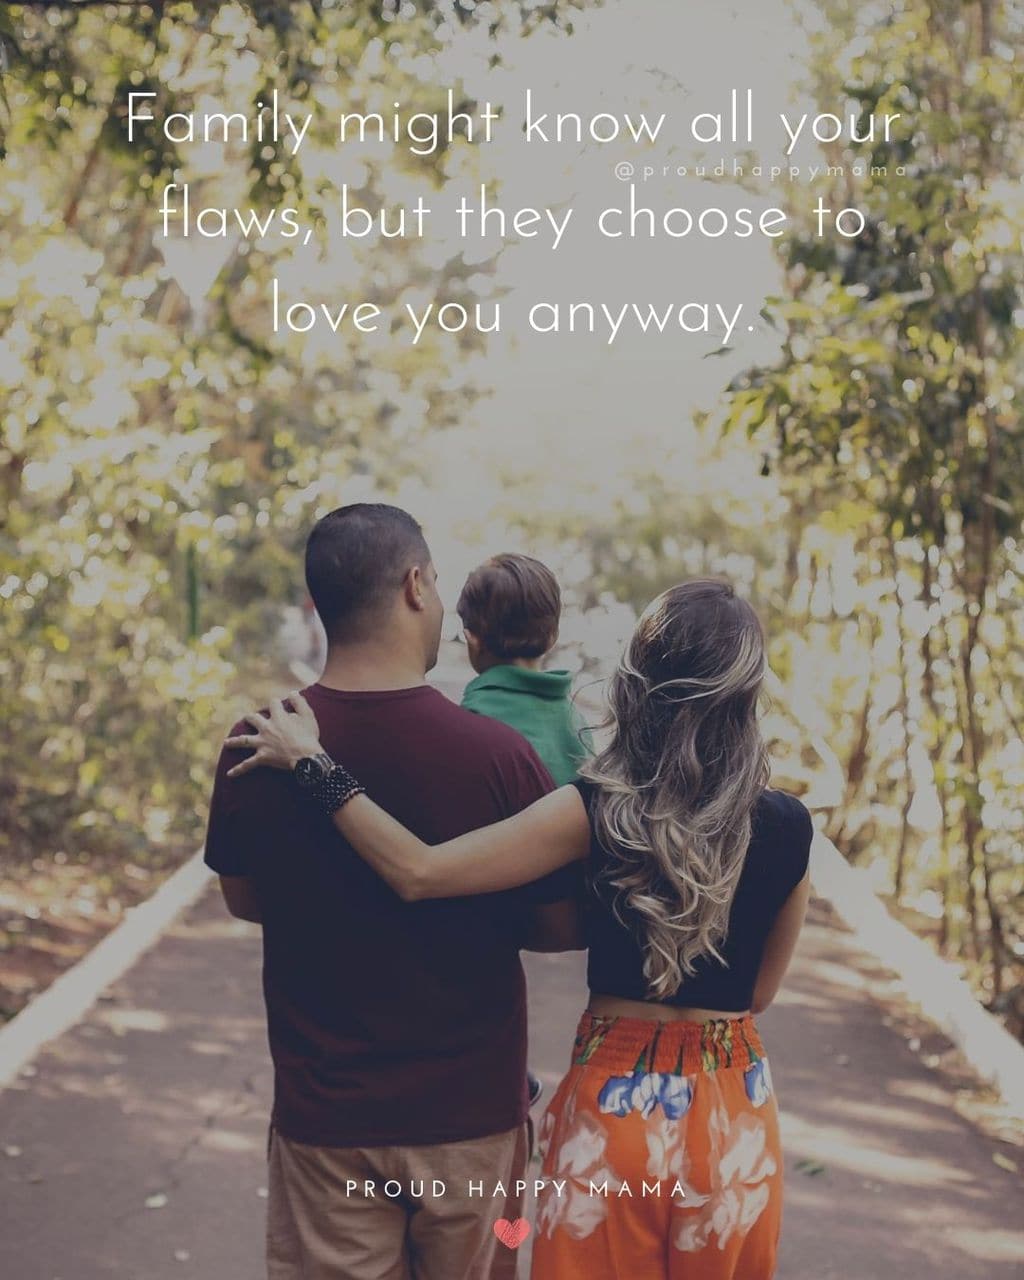 Family Is Love Quotes | Family might know all your flaws, but they choose to love you anyway.